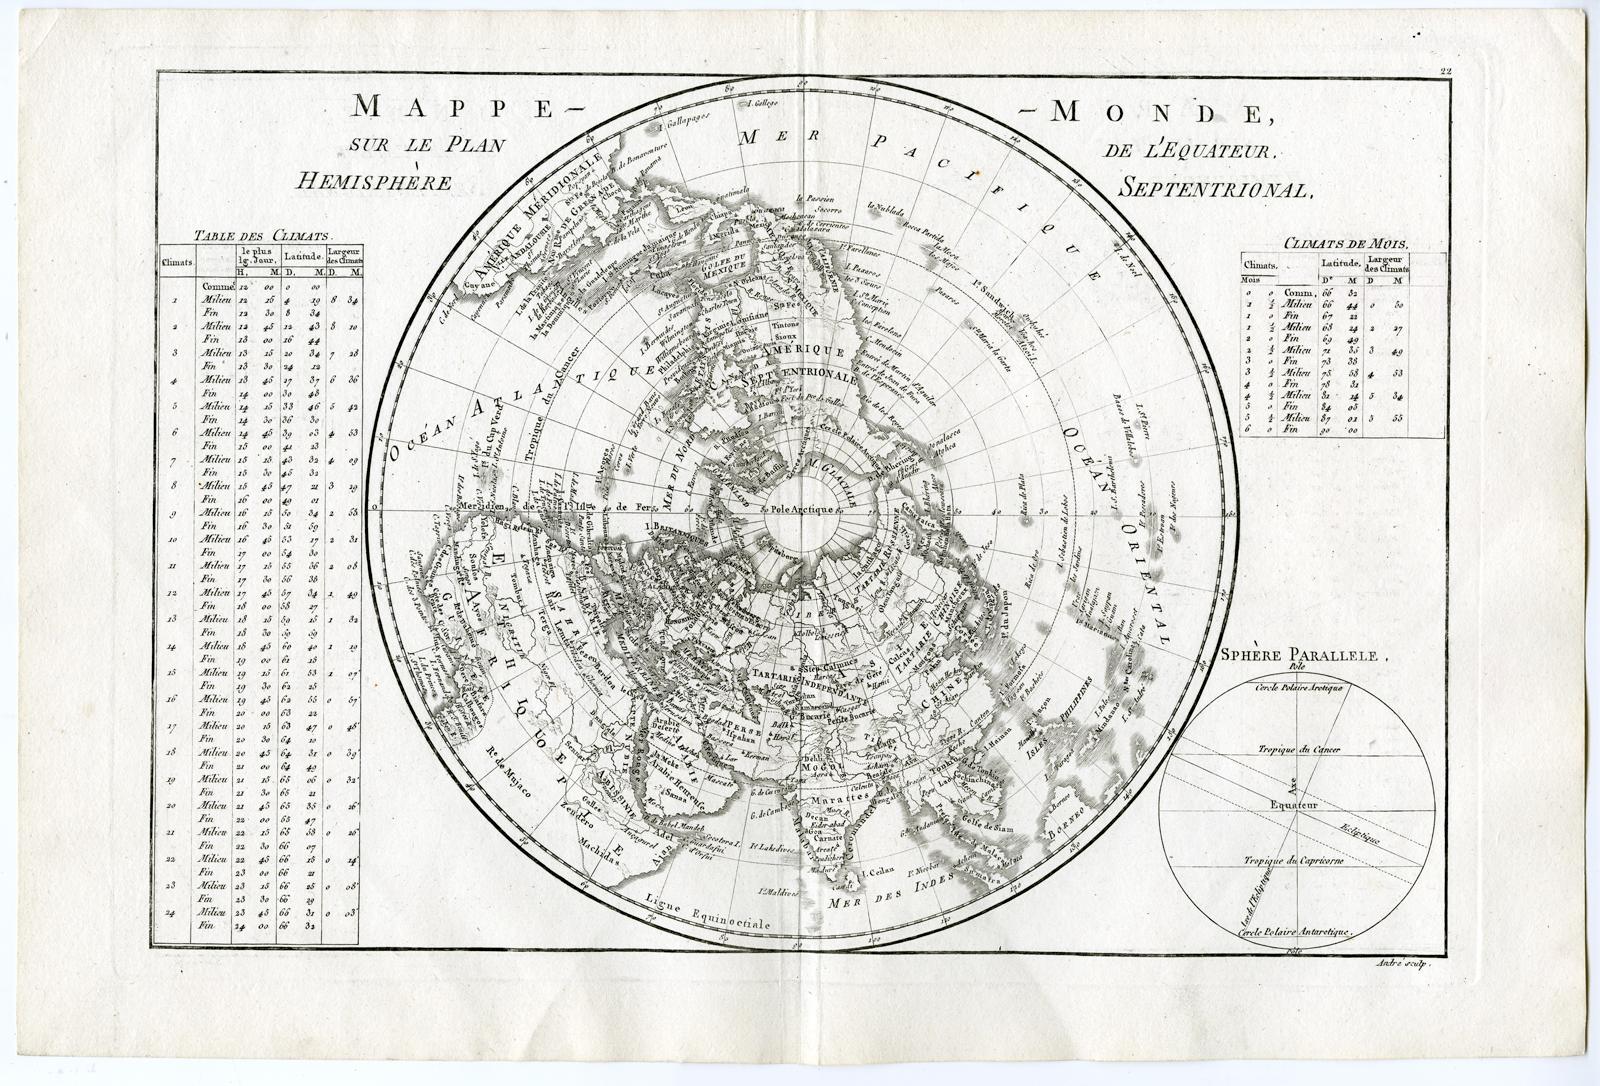 Subject: Antique print, titled: 'Mappe Monde, sur le Plan de l'Equateur. Hemisphere Septentrional.' - Map of the Northern Hemisphere. Shows the extent of Cook's explorations in the Pacific and NW Coast of America, potential NW Passage, etc.
 
